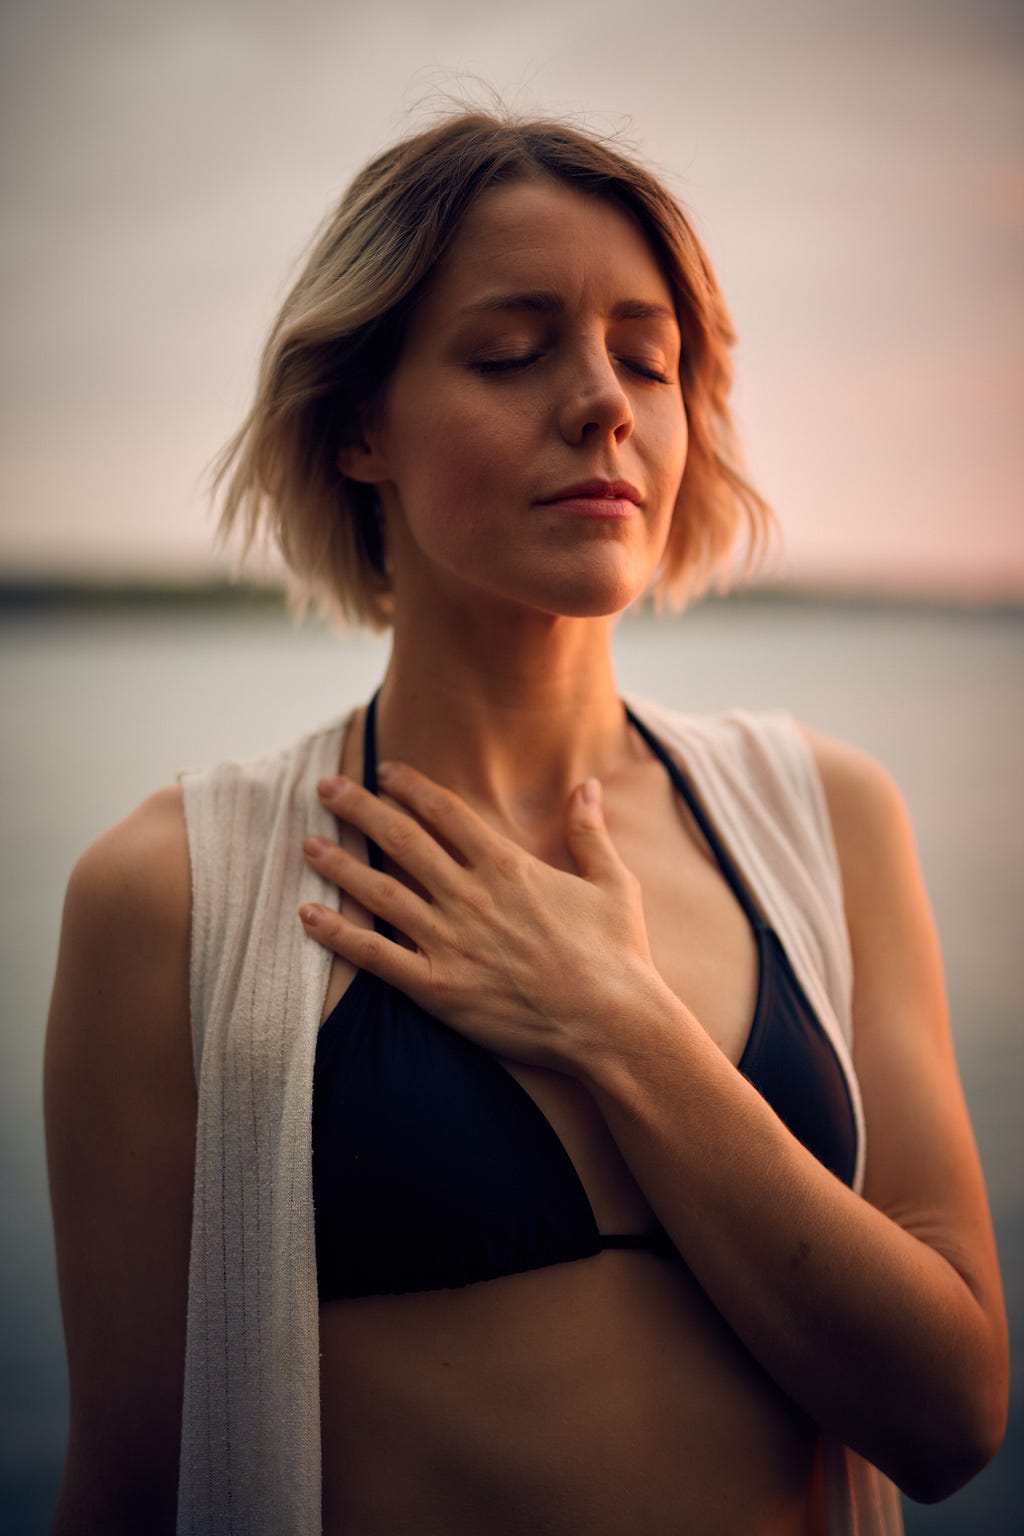 woman with medium blond hair holding her palm to her chest and looking calm.